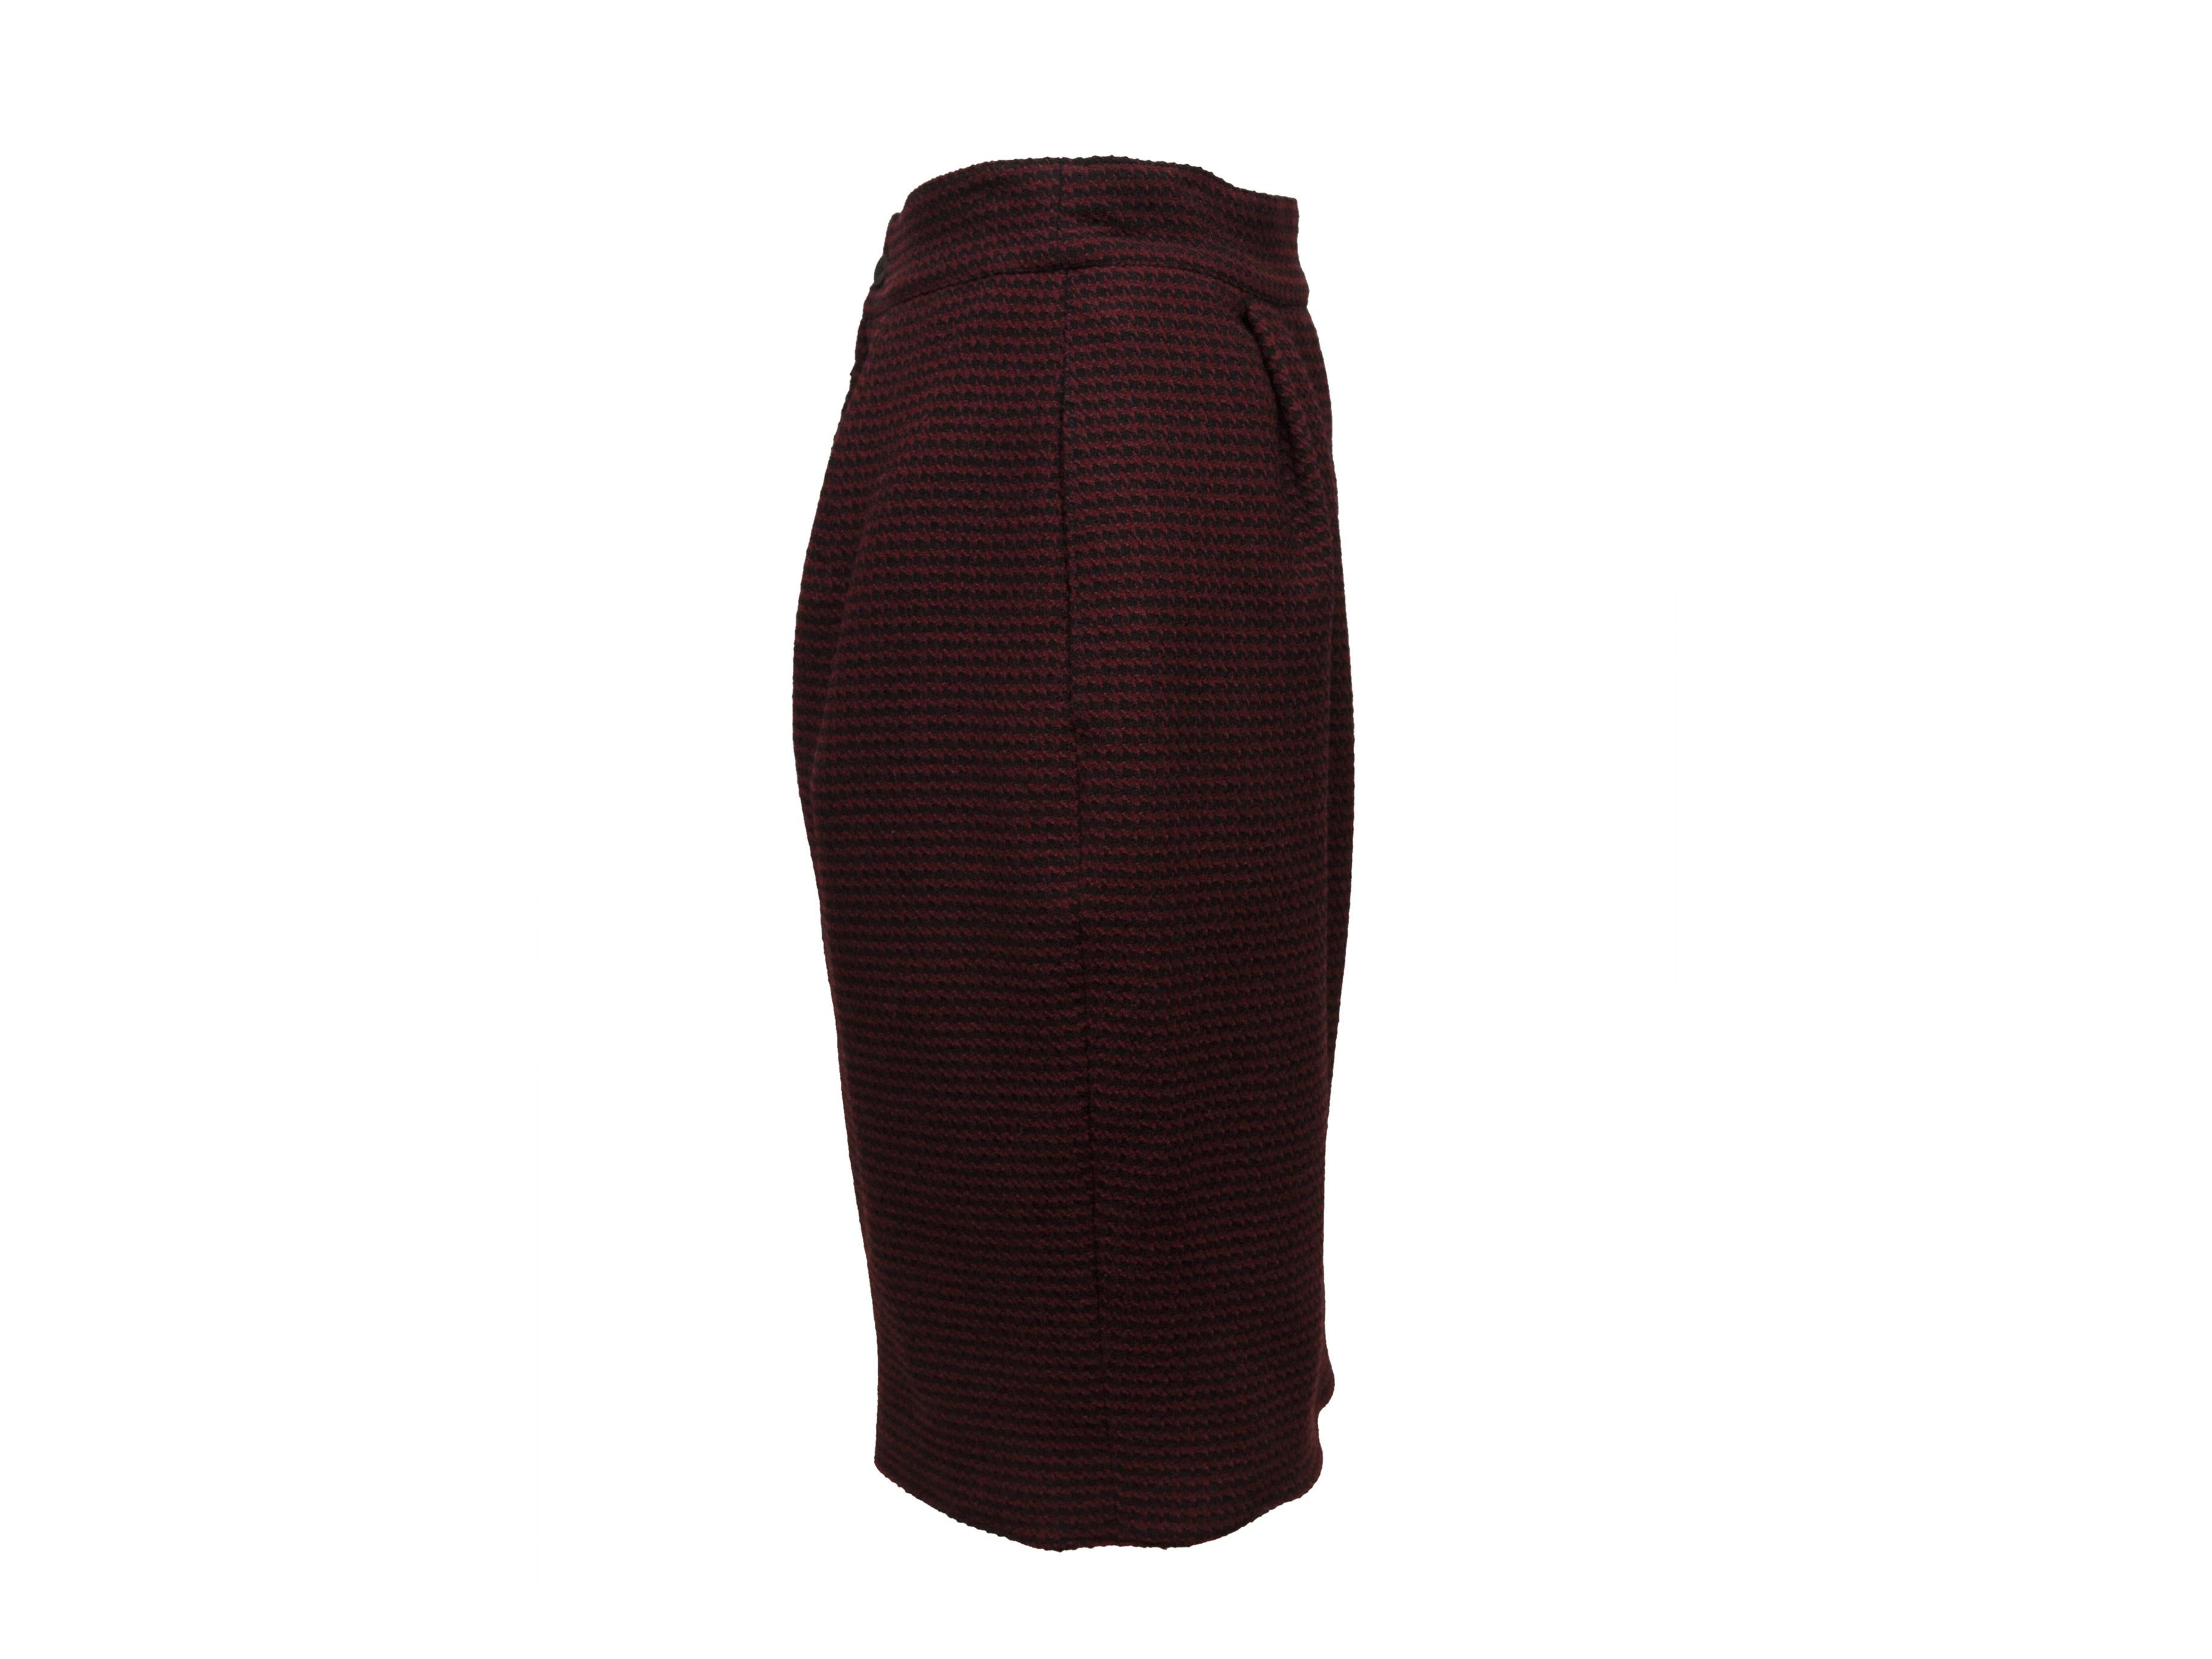 Product details: Burgundy and black wool skirt suit by Christian Lacroix. Houndstooth pattern throughout. Jacket features high neck, puff shoulders and zip closure at center front. Skirt features zip closure at back. Designer size 42. Jacket- 30